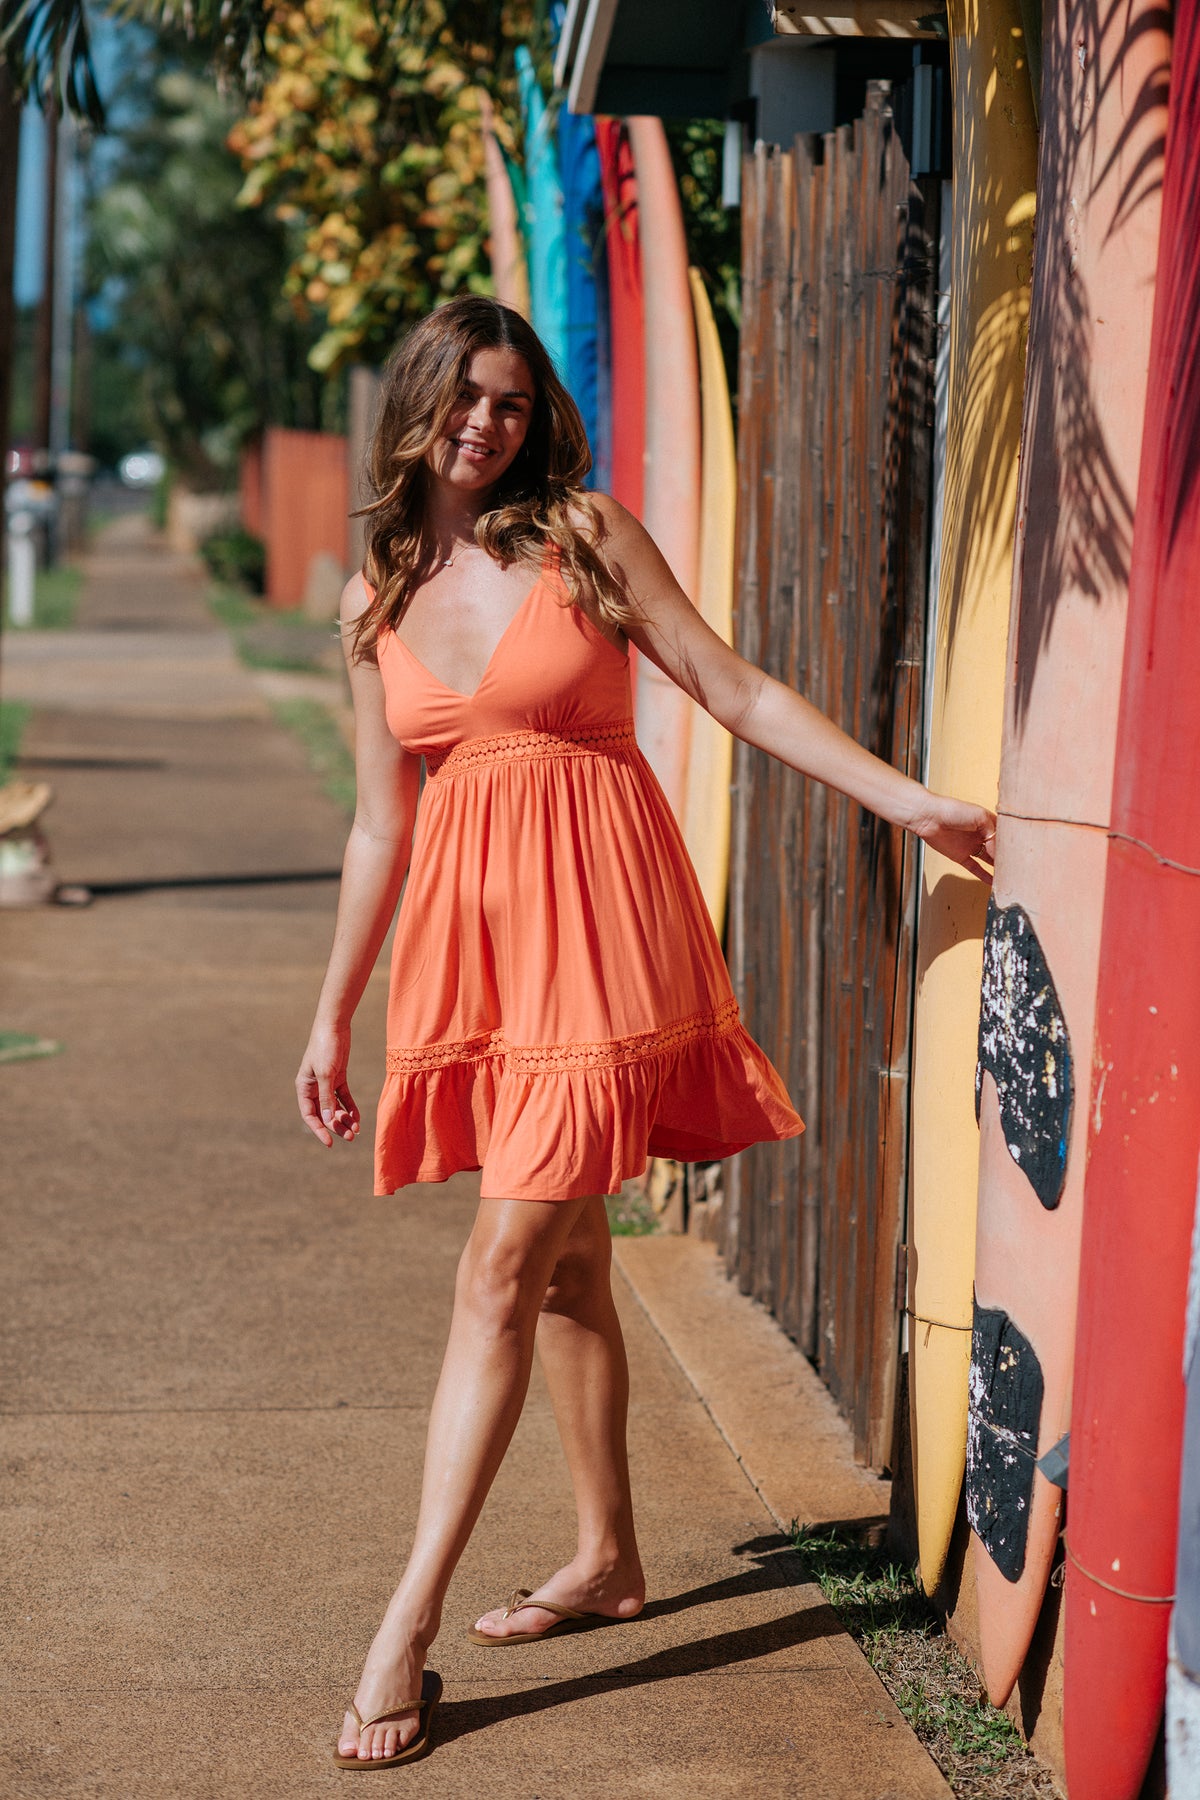 a burnette hair model posing on the street besides pink surf boards weaing a punch coral color mini dress from Koy Resort with on hand touching the surf board and matching the dress with brown flip flops